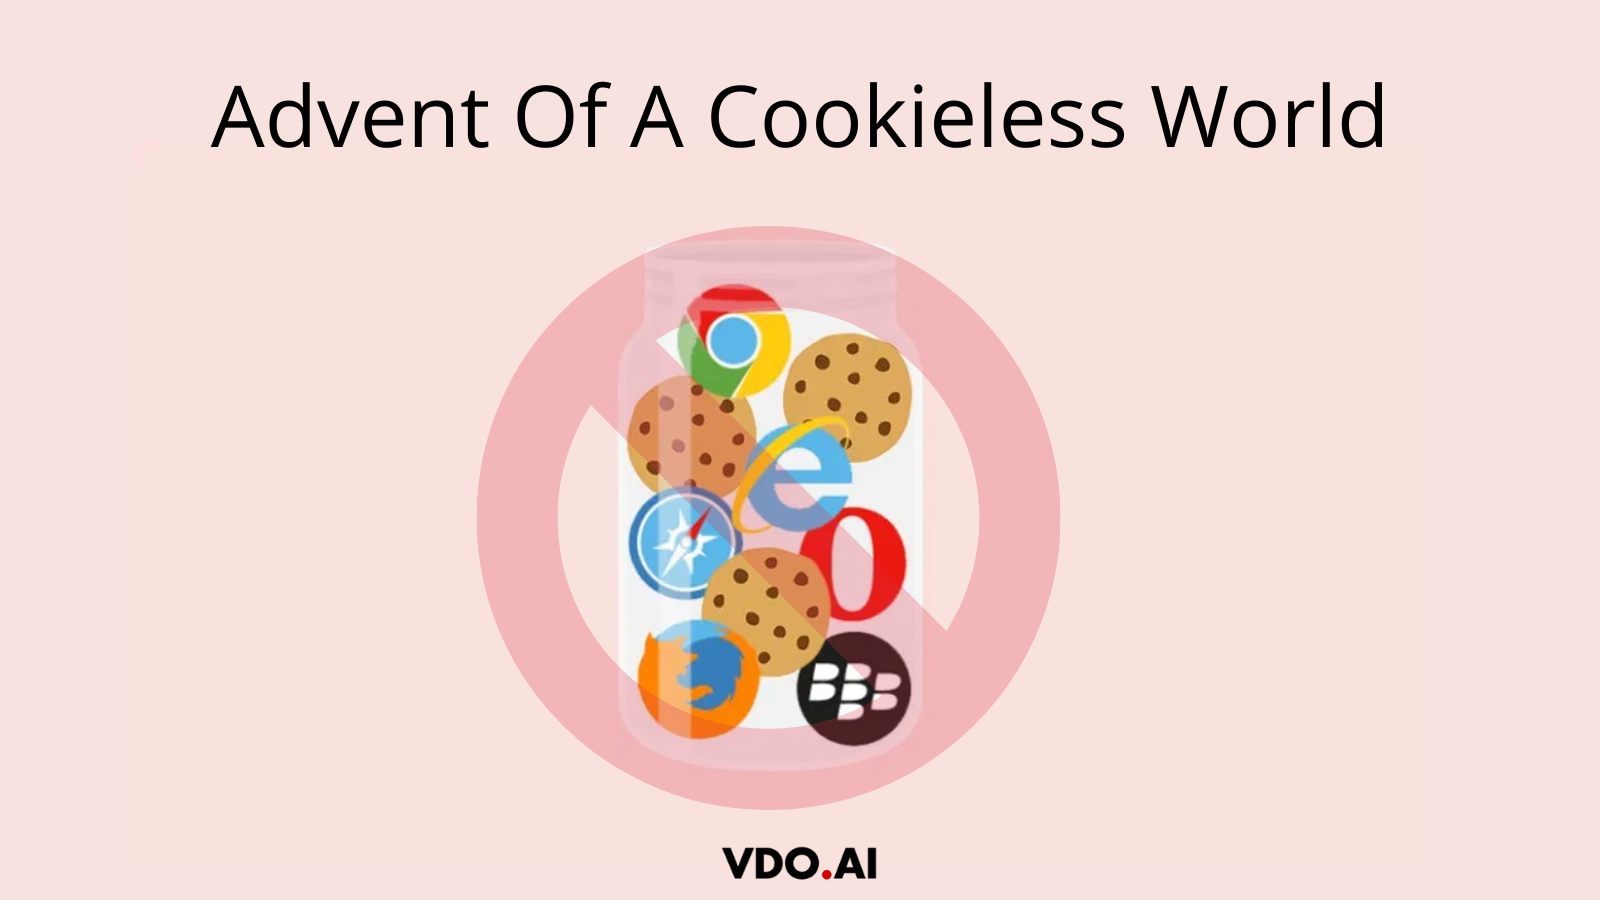 Advent of a cookieless world